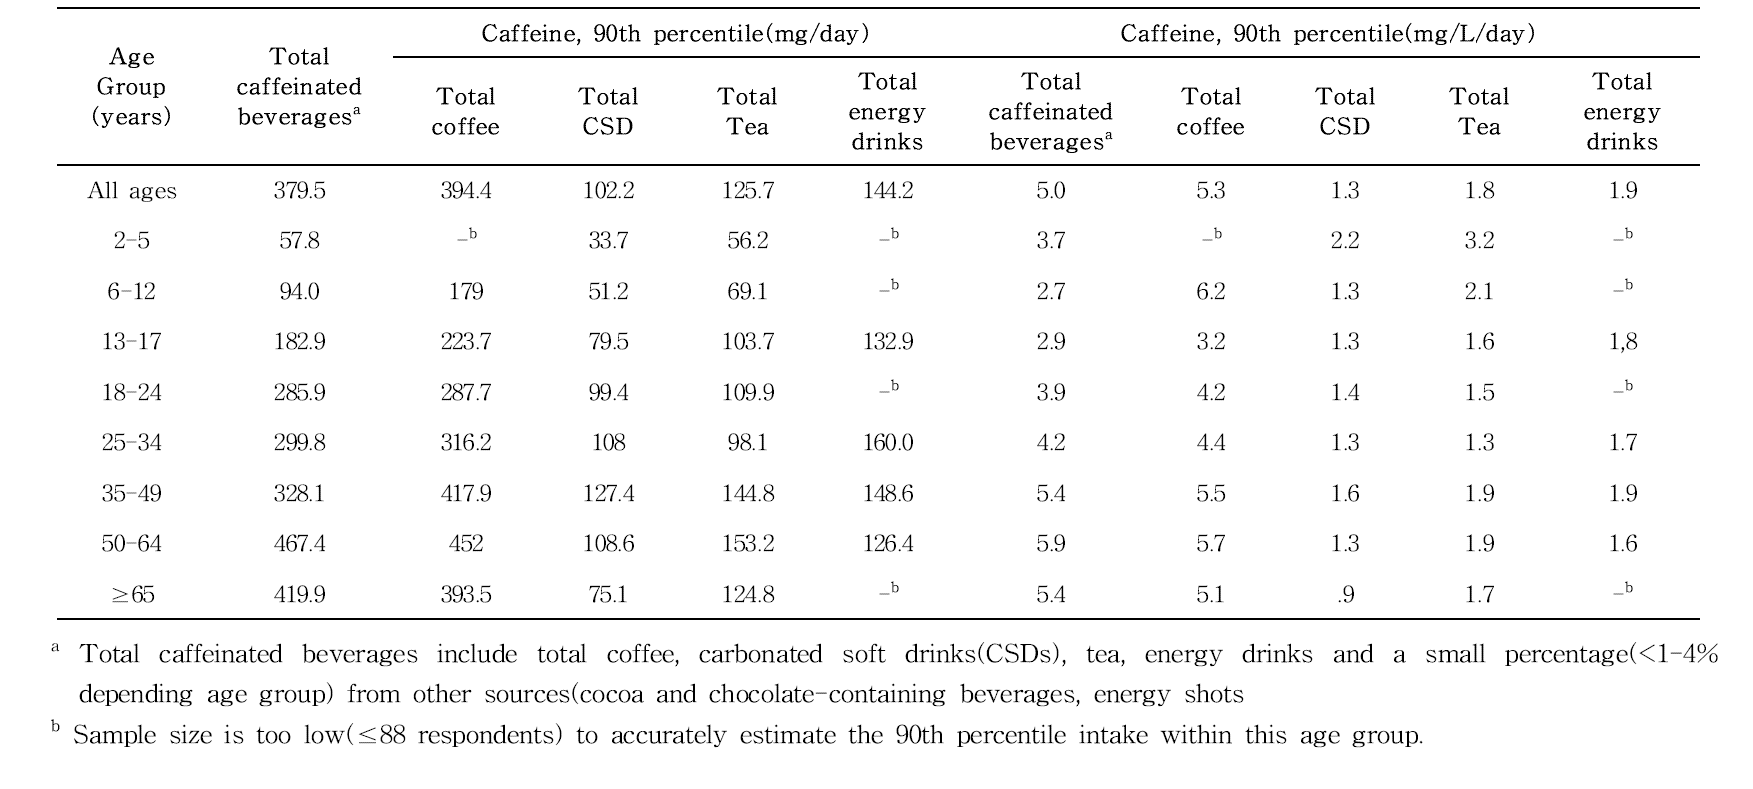 90th Percentile caffeine intakes by age group for consumers of total caffeinated beverages and each respective beverage category